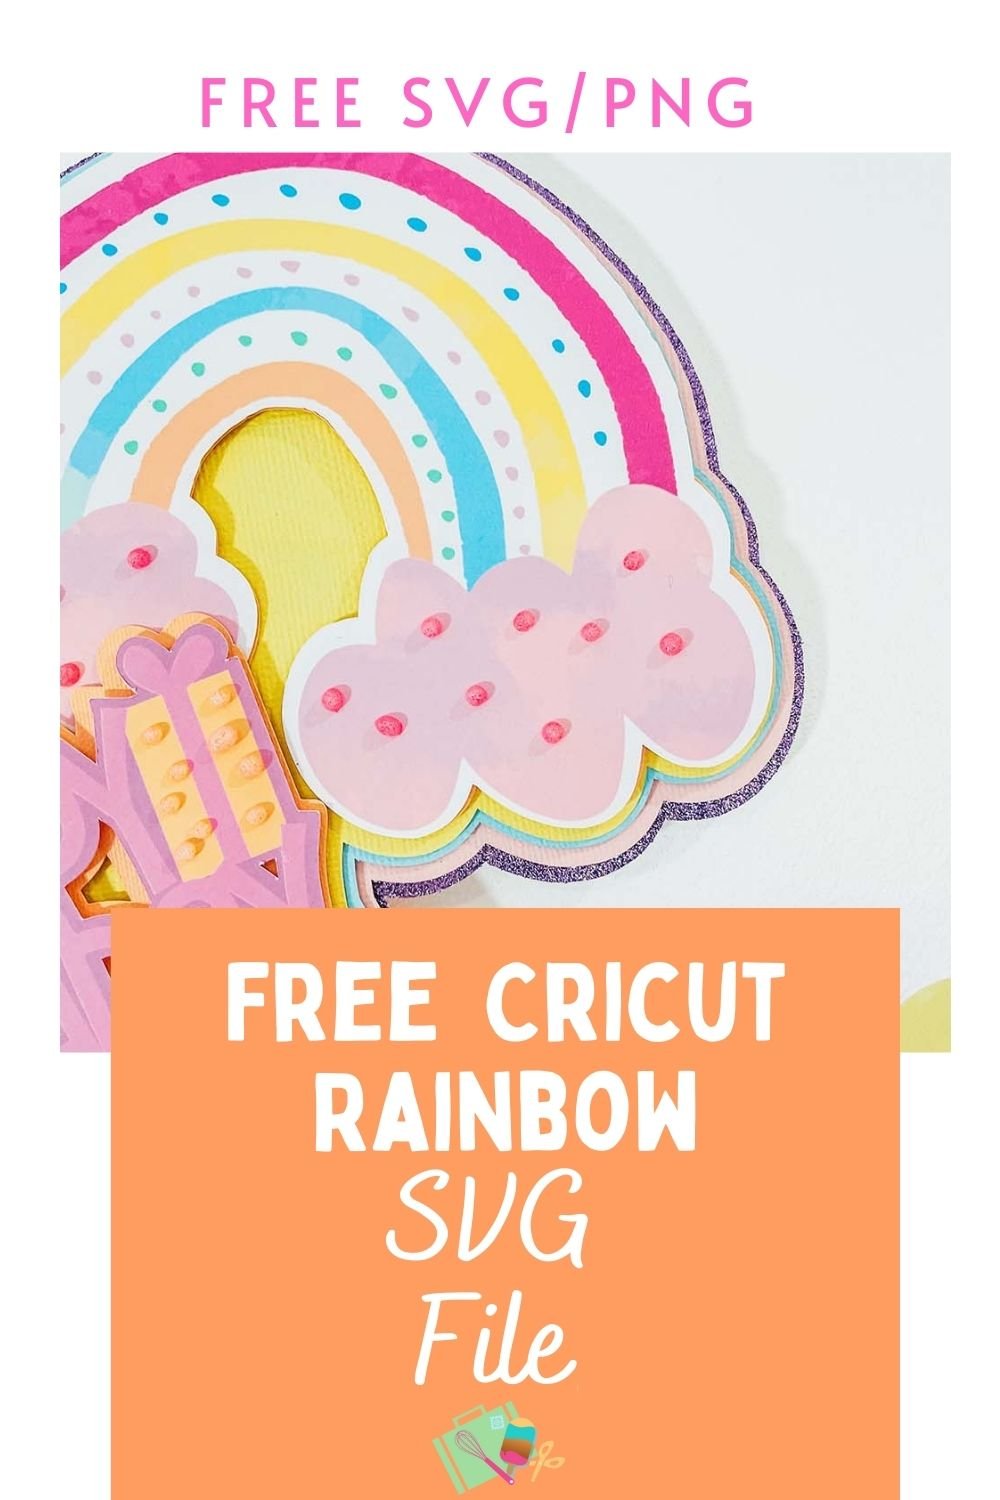 Free Cricut rainbow SVG file for card making and scrapbooking